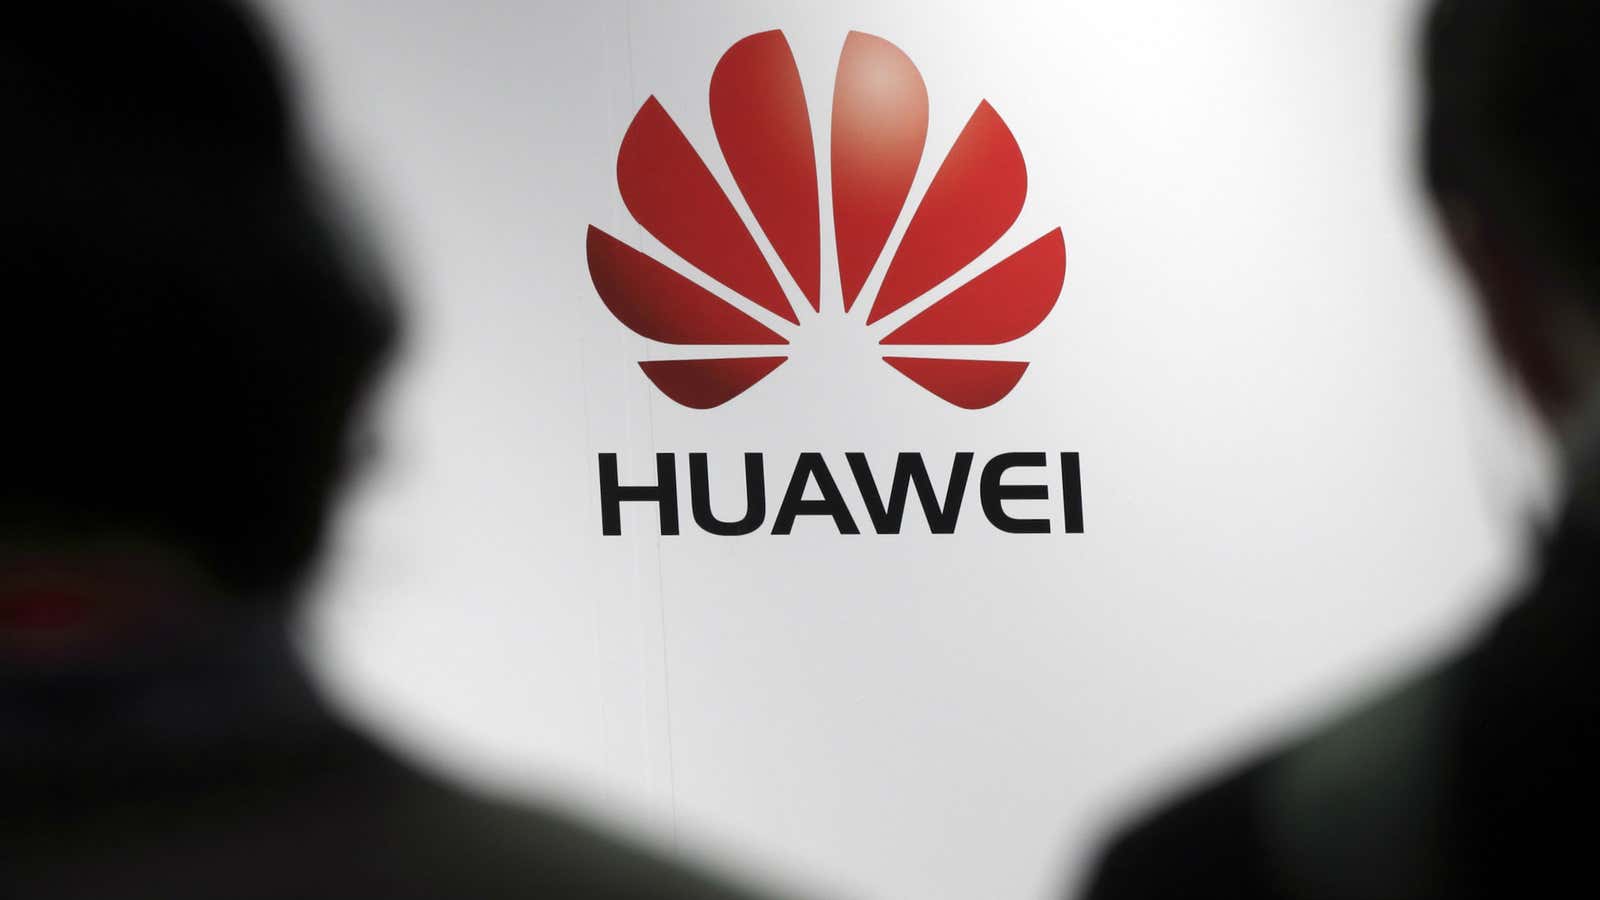 Huawei, started by a former People’s Liberation Army officer, is working to change its image.